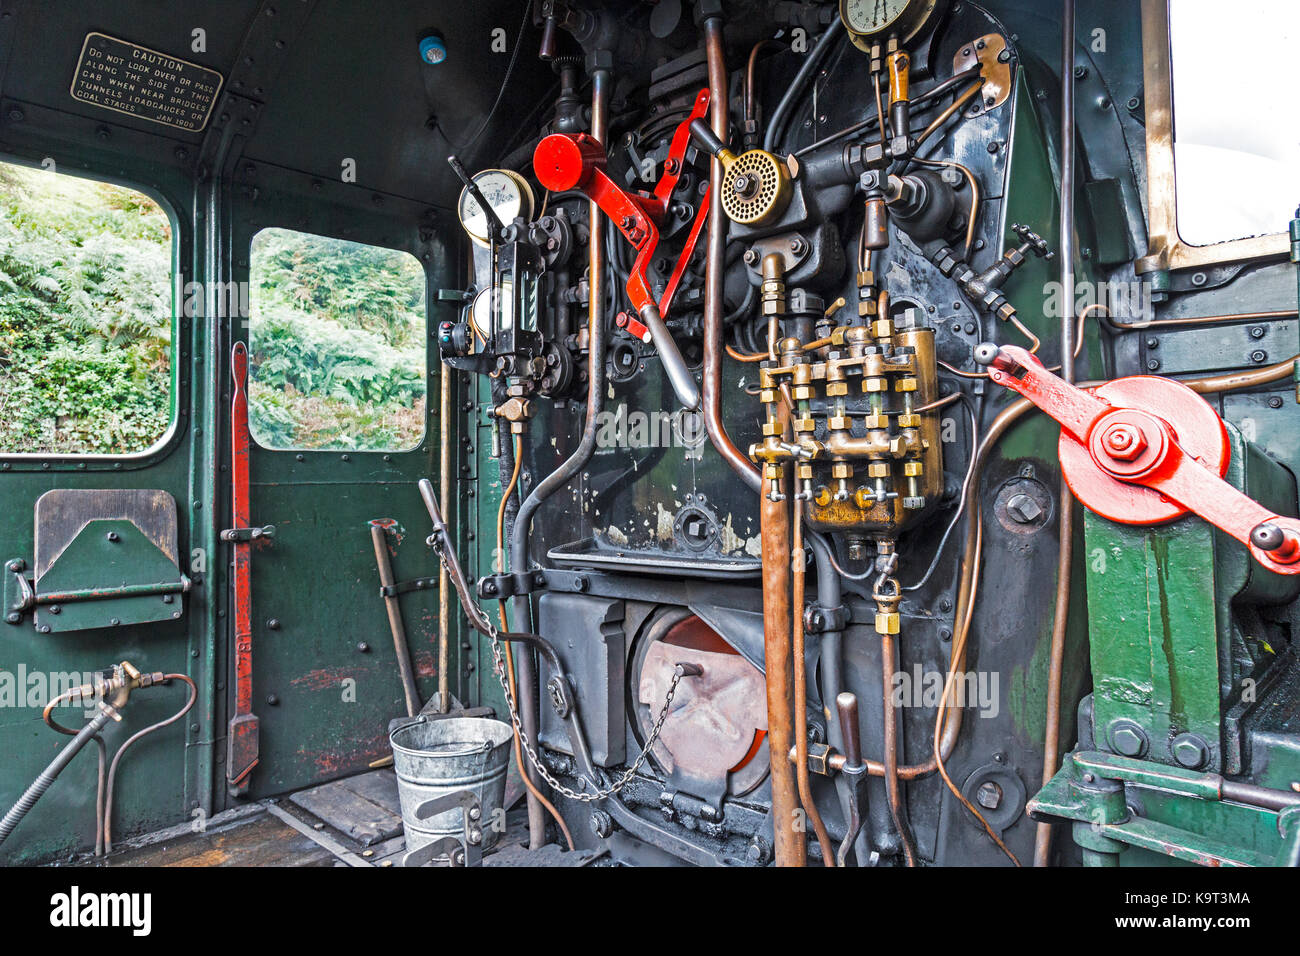 Footplate and cabin of a steam locomotive engine, showing dials, levers, pipes, and opening for coal to feed the boiler. Stock Photo